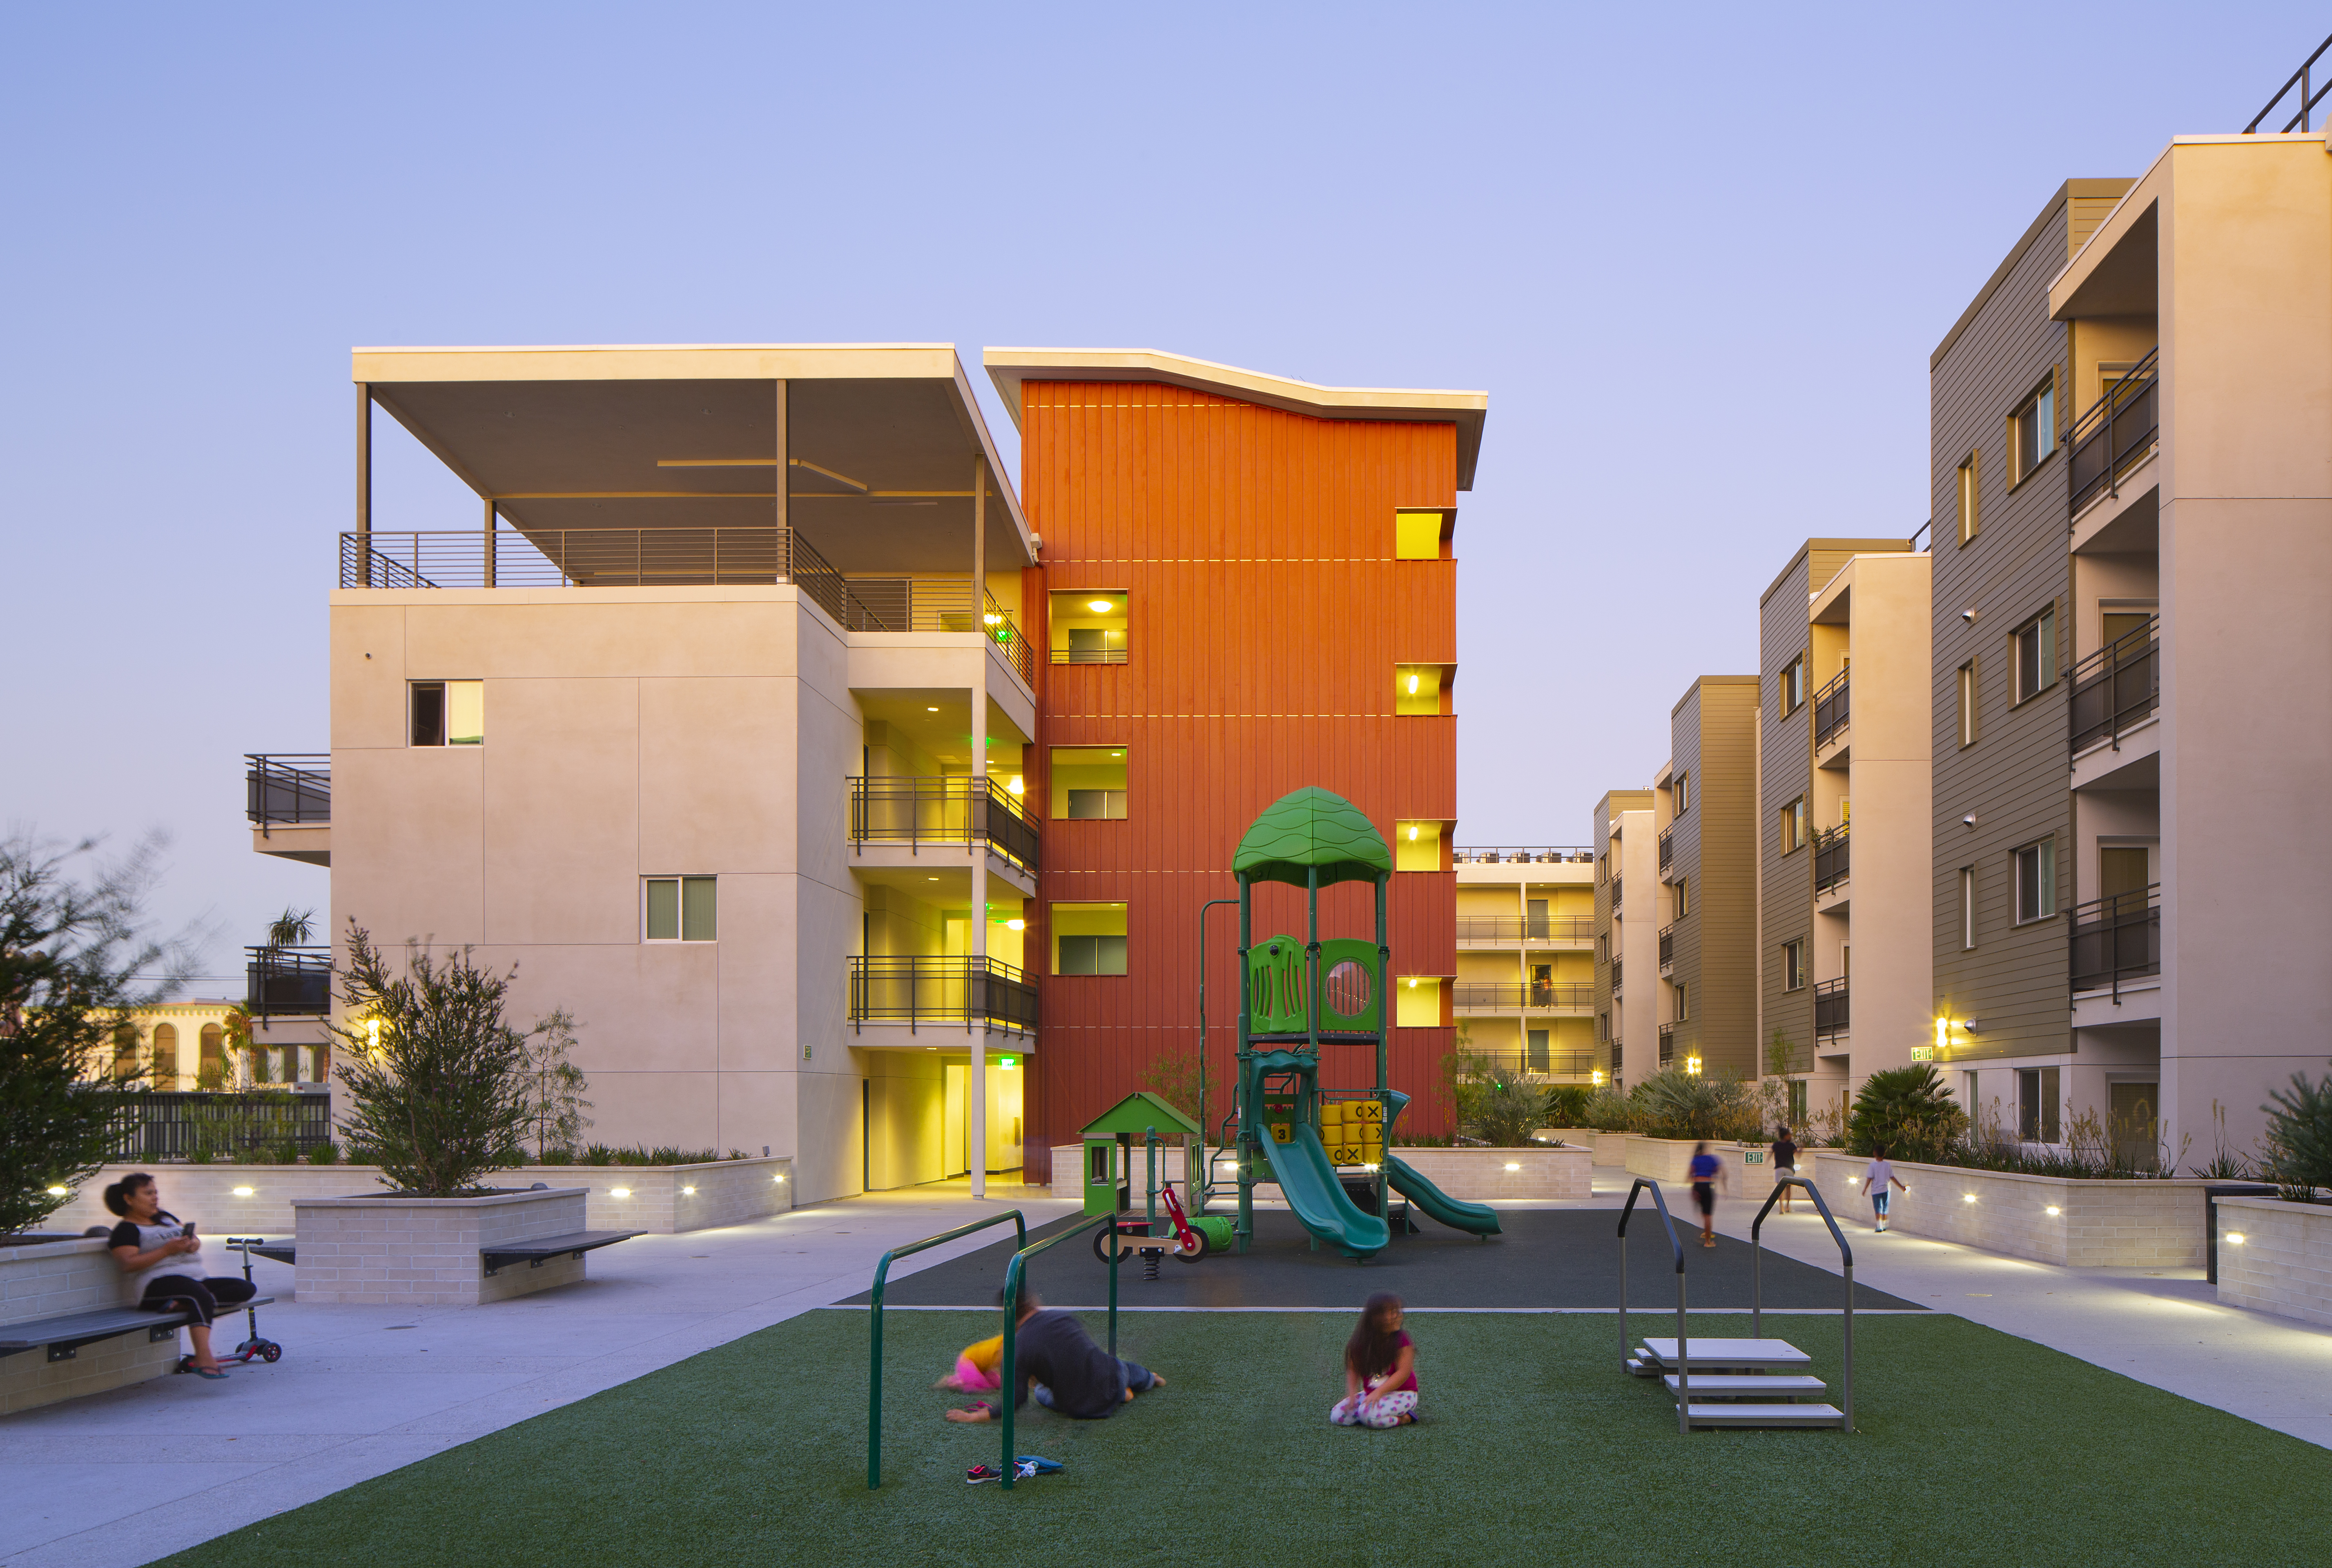 Front view of the playground, view of the building in the back, children playing, a woman with a cell phone on her hand sitting on a bench watching three kids playing, other three kids walking by the playground, gray soft pave flooring on one side and gra